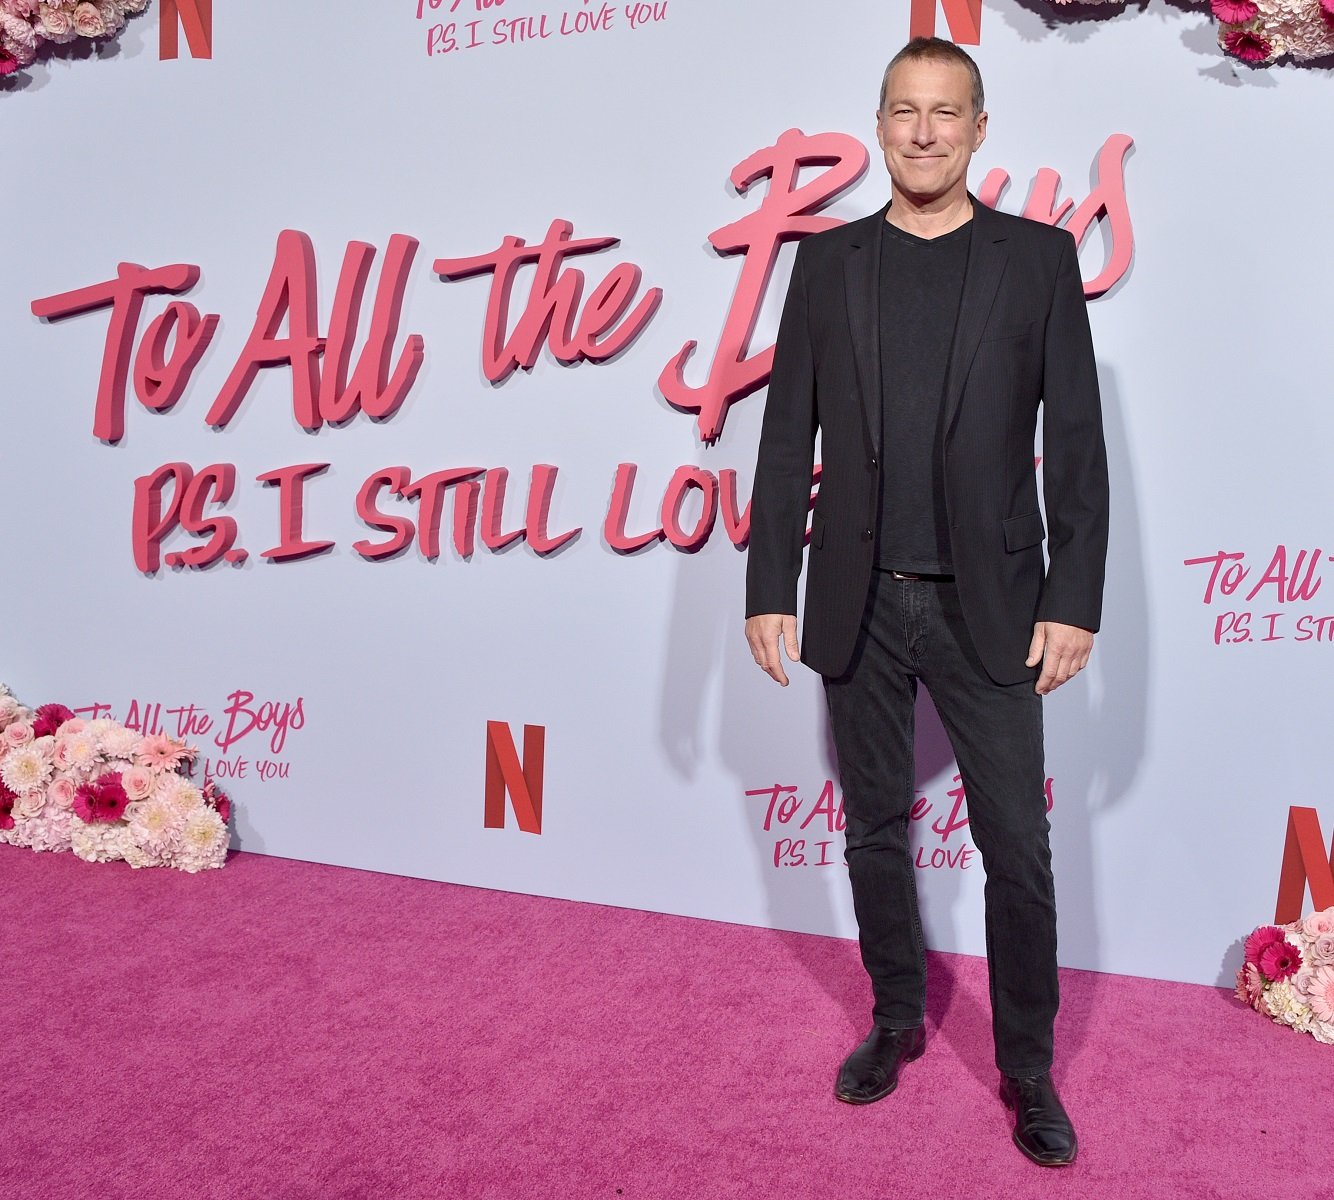 John Corbett appears at the premiere of 'To All The Boys: P.S. I Still Love You' in February 2020